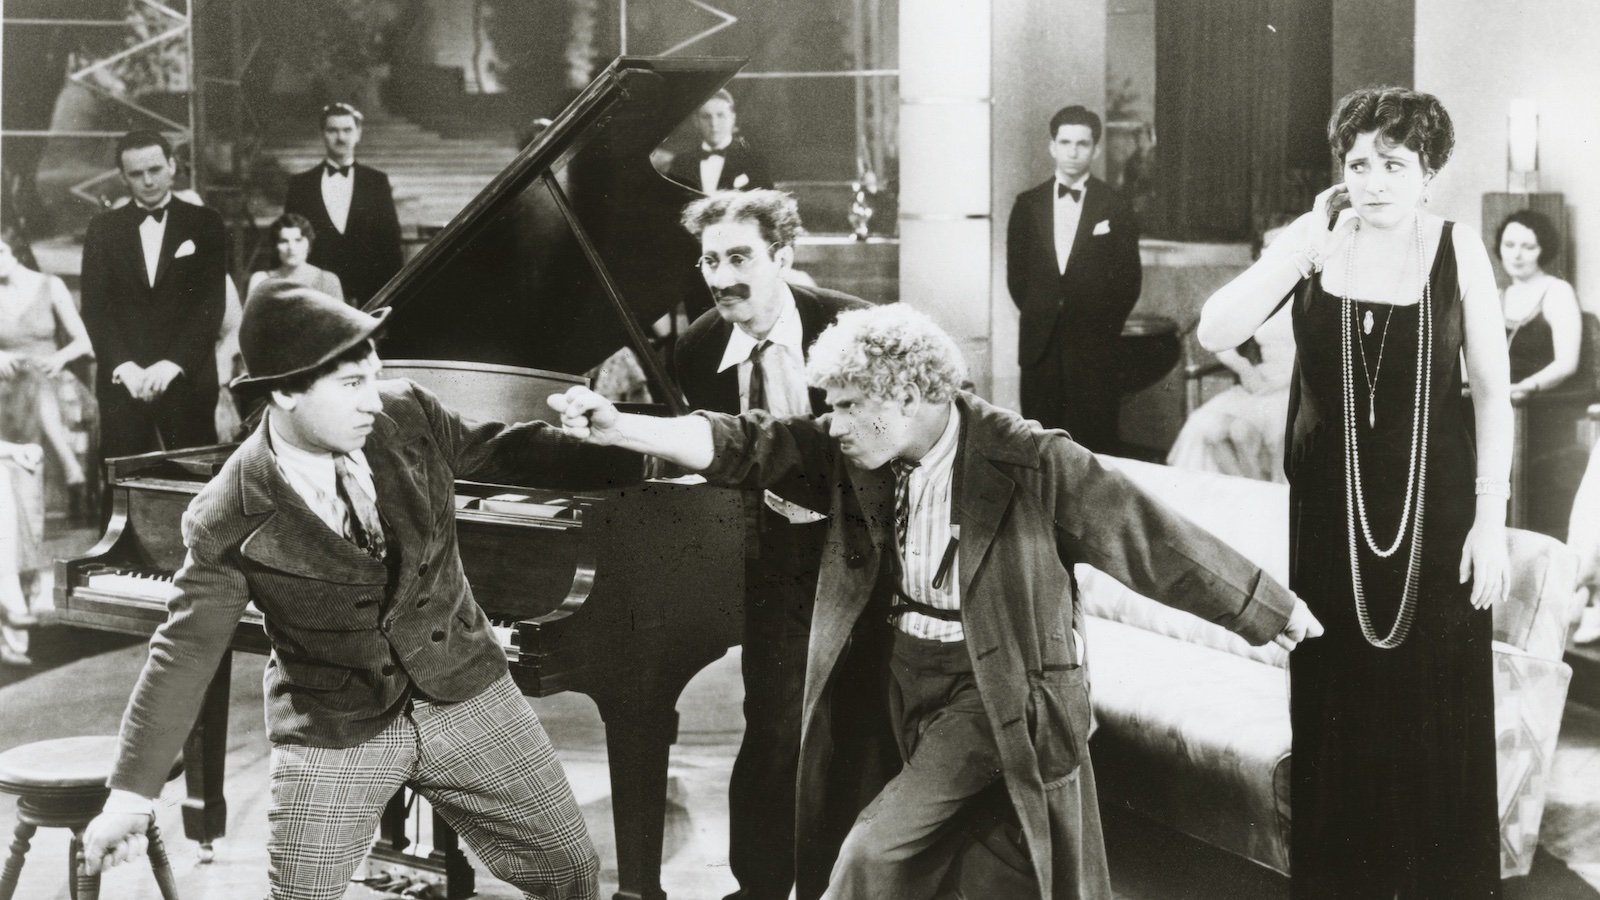 Two men mock fight in front of a grand piano at a party while a man with a painted-on mustache eggs them on and a woman in an evening gown and long pearl necklace watches from the sides.